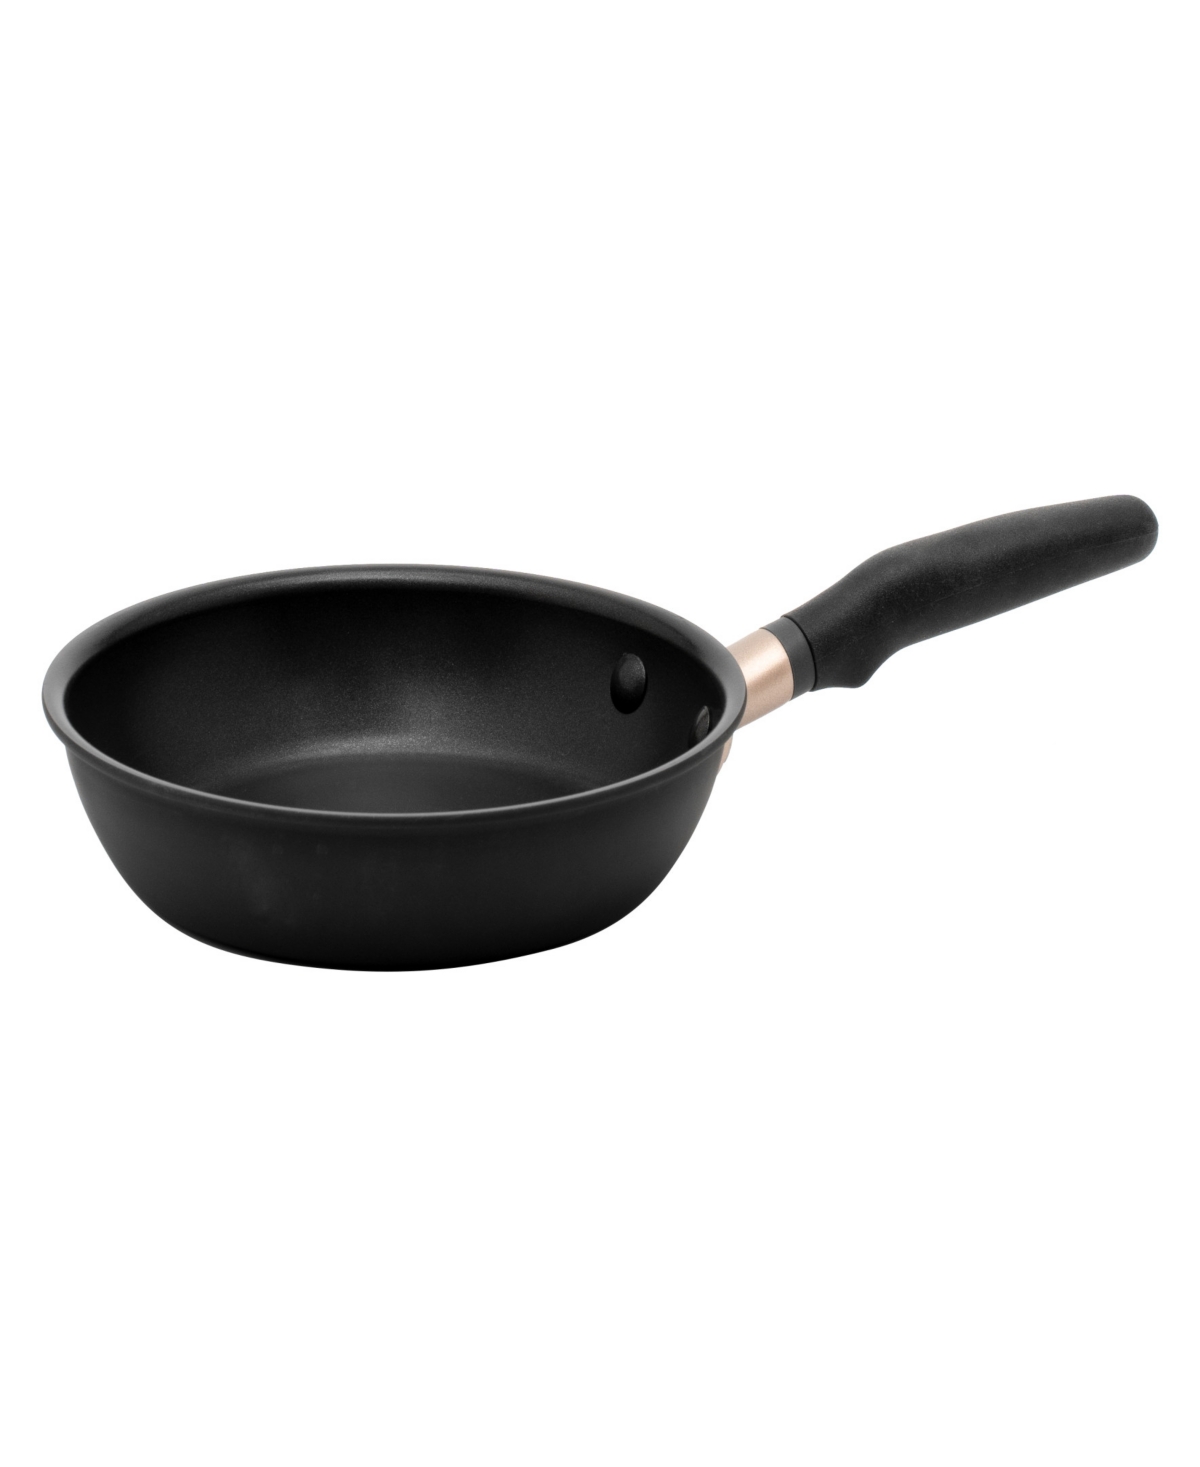 MEYER ACCENT SERIES HARD ANODIZED ALUMINIUM 8" ULTRA DURABLE NON-STICK FRYING PAN